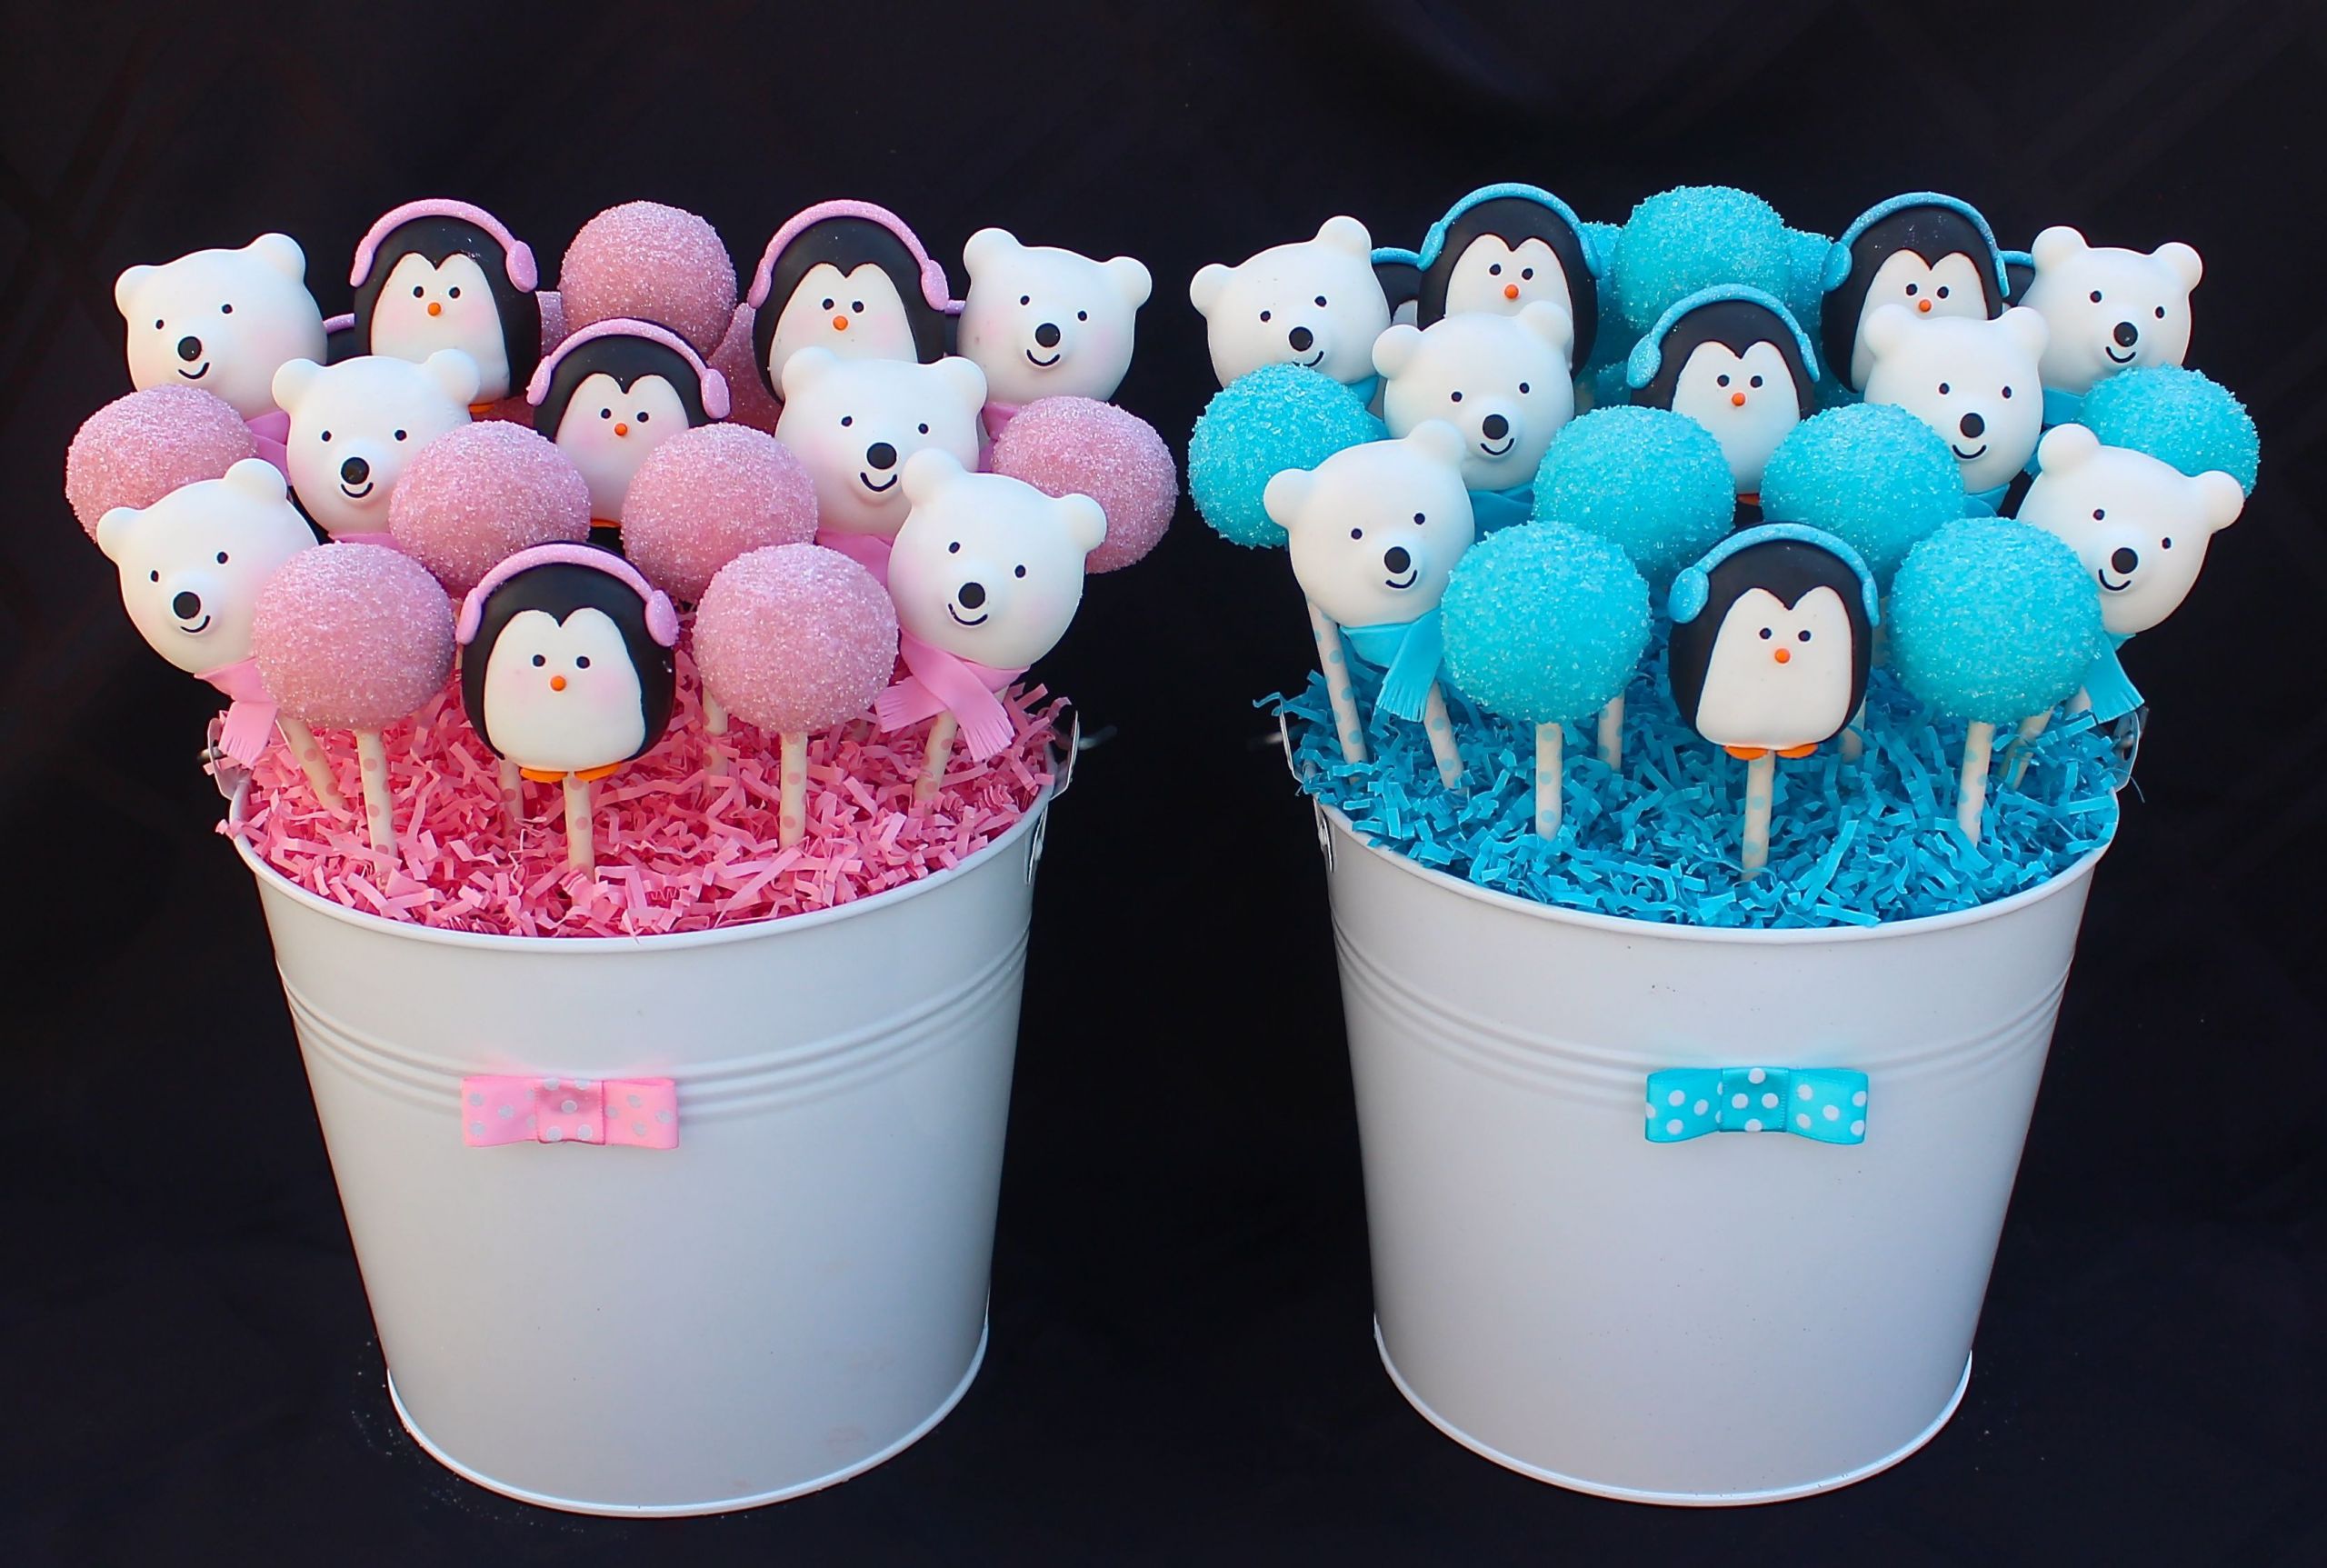 Winter Gender Reveal Party Ideas
 Winter themed Gender Reveal Cake Pops with polar bears and